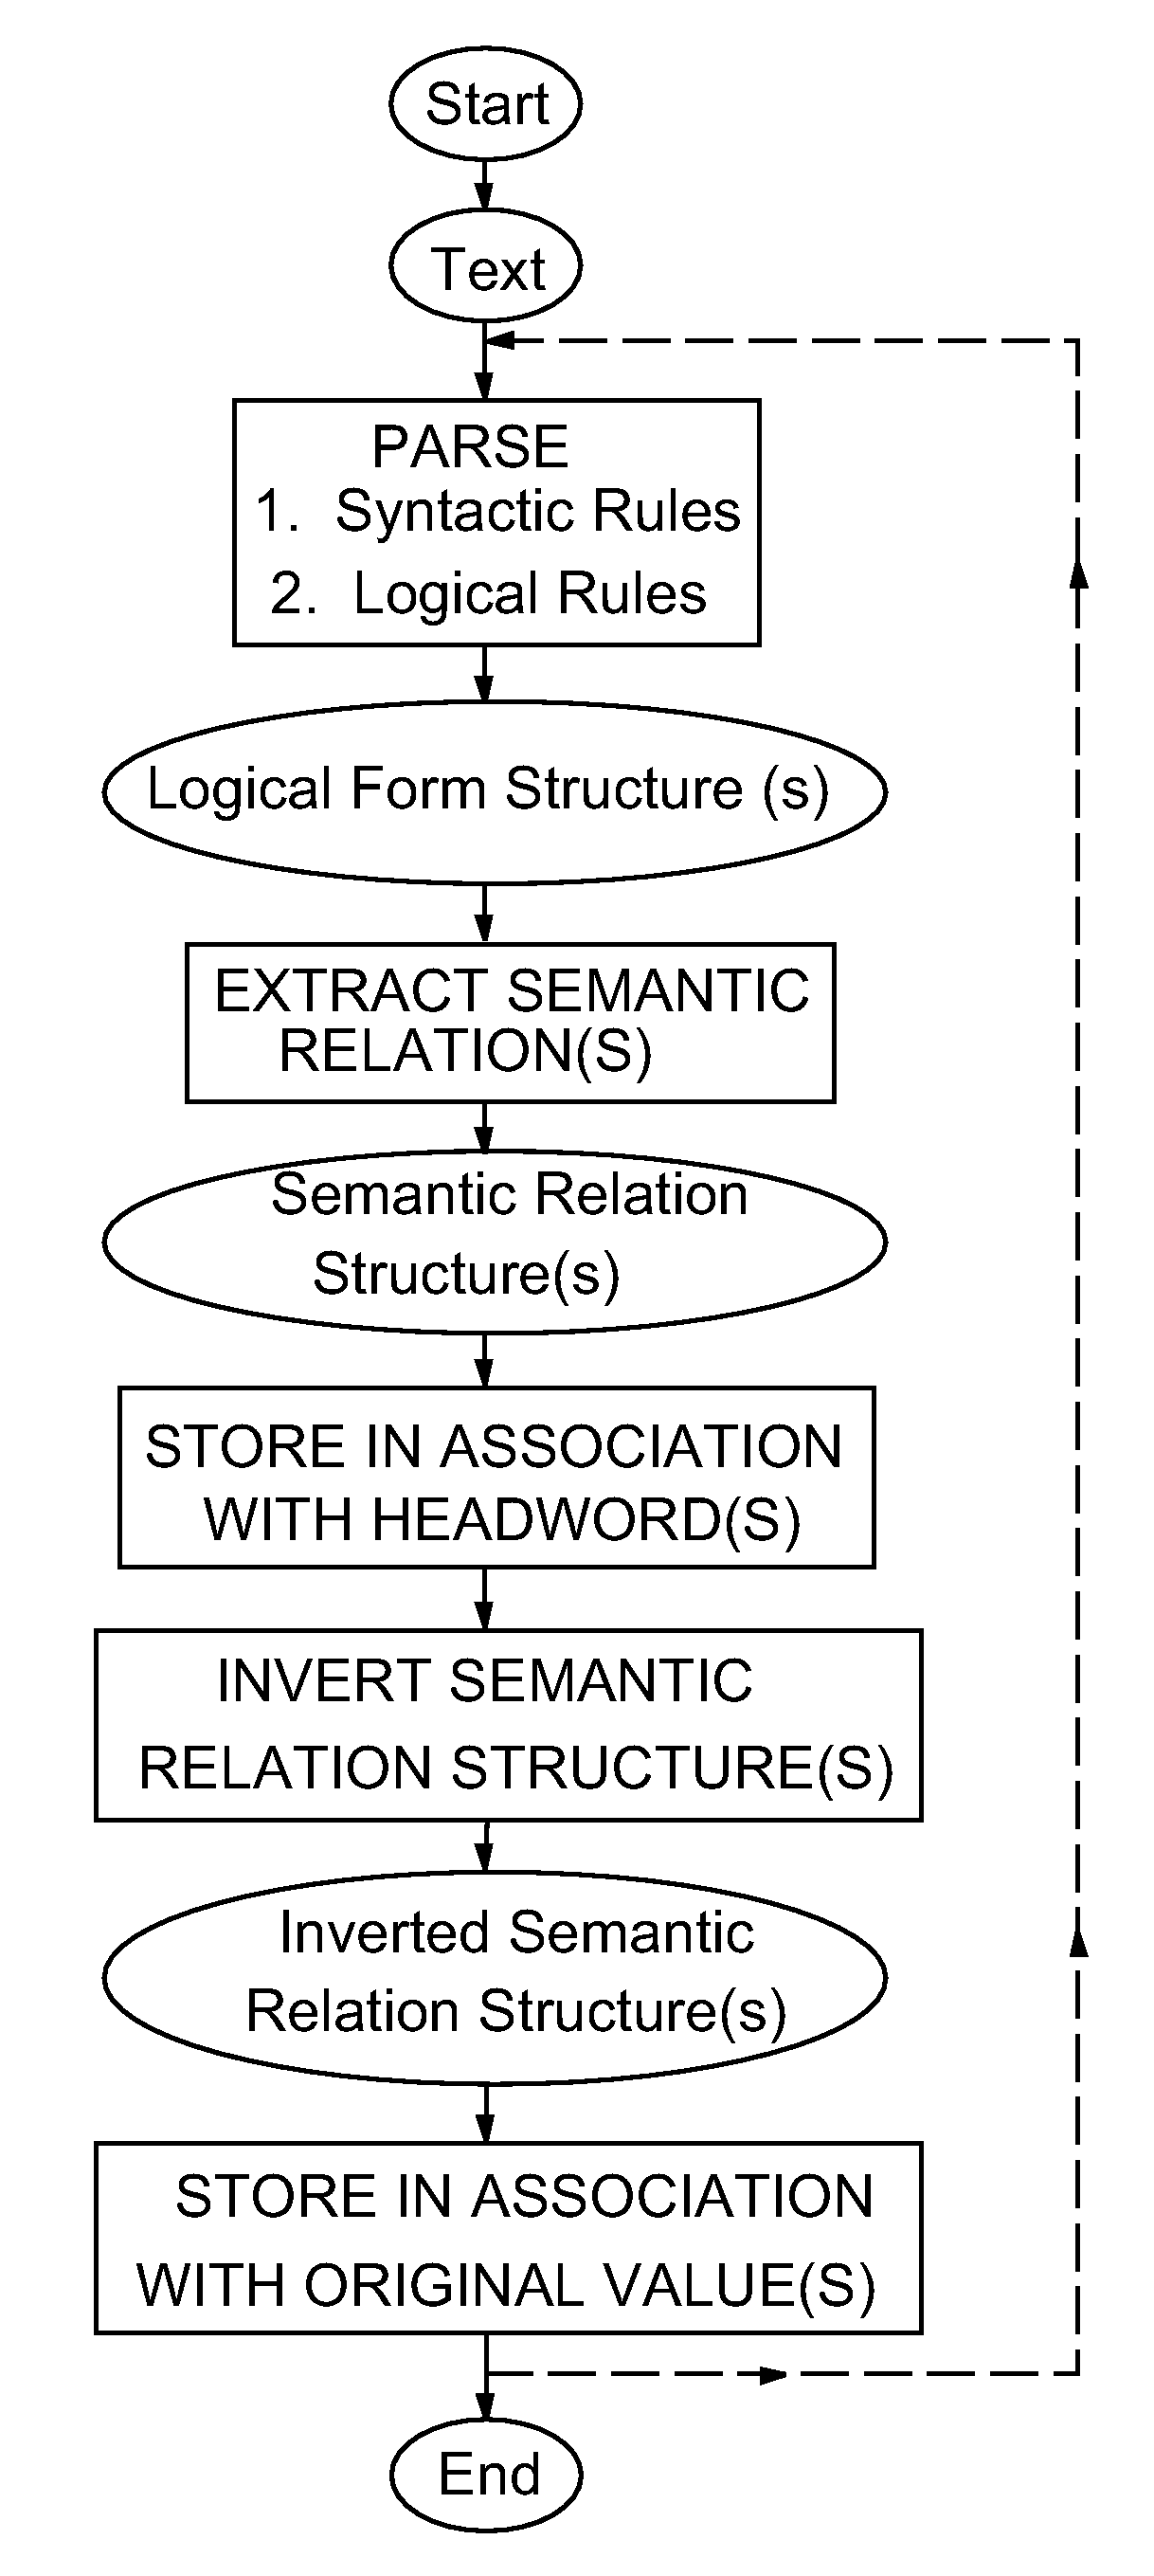 Method and system for compiling a lexical knowledge base using backwards-linking natural language processing